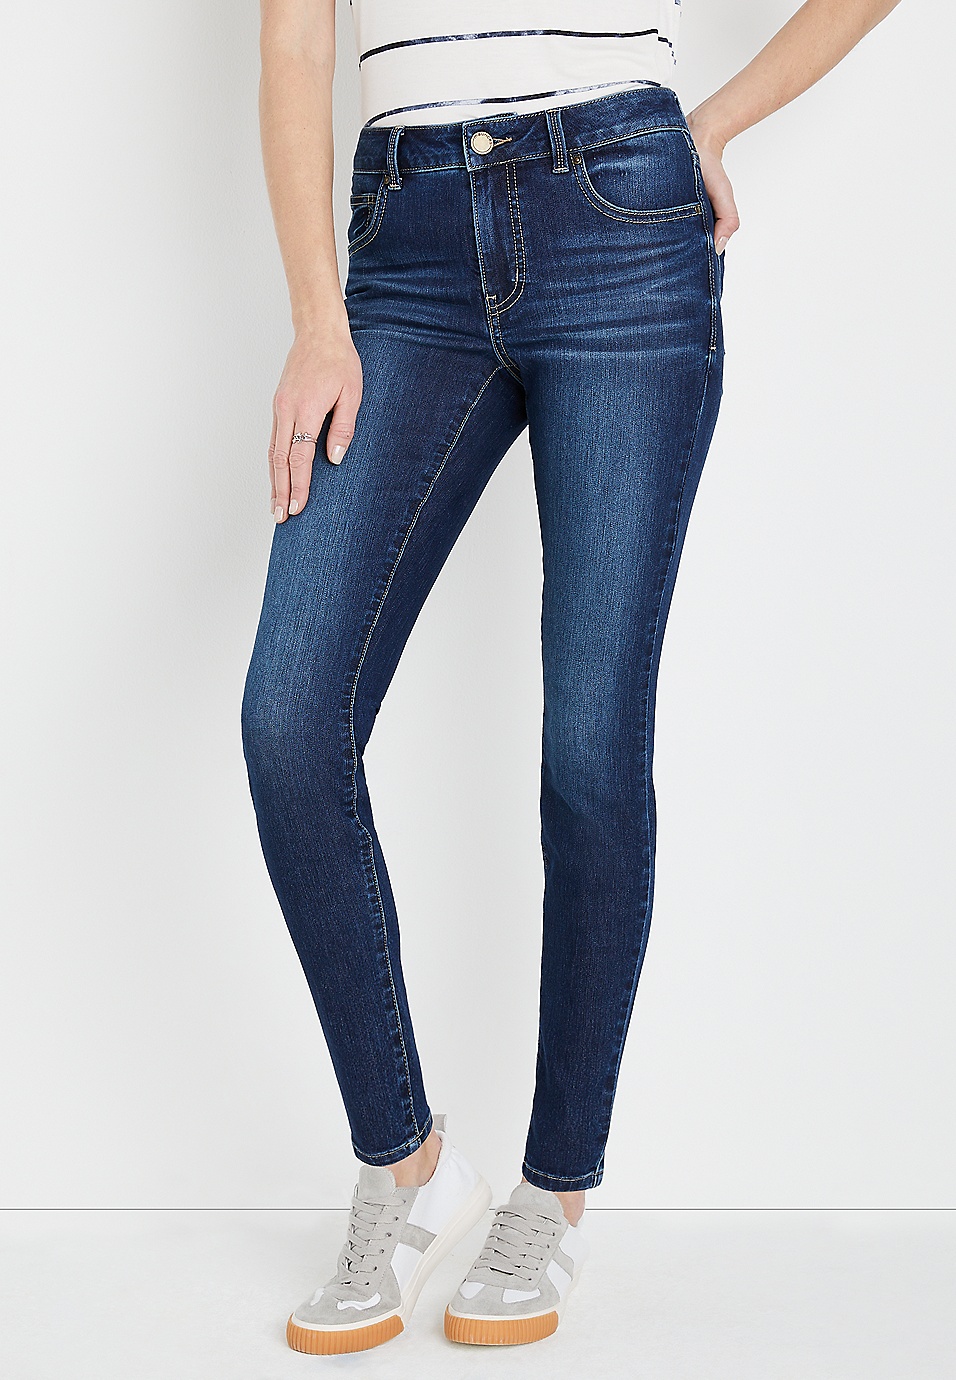 m jeans by maurices™ Everflex™ Super Skinny Mid Rise Ankle Jean